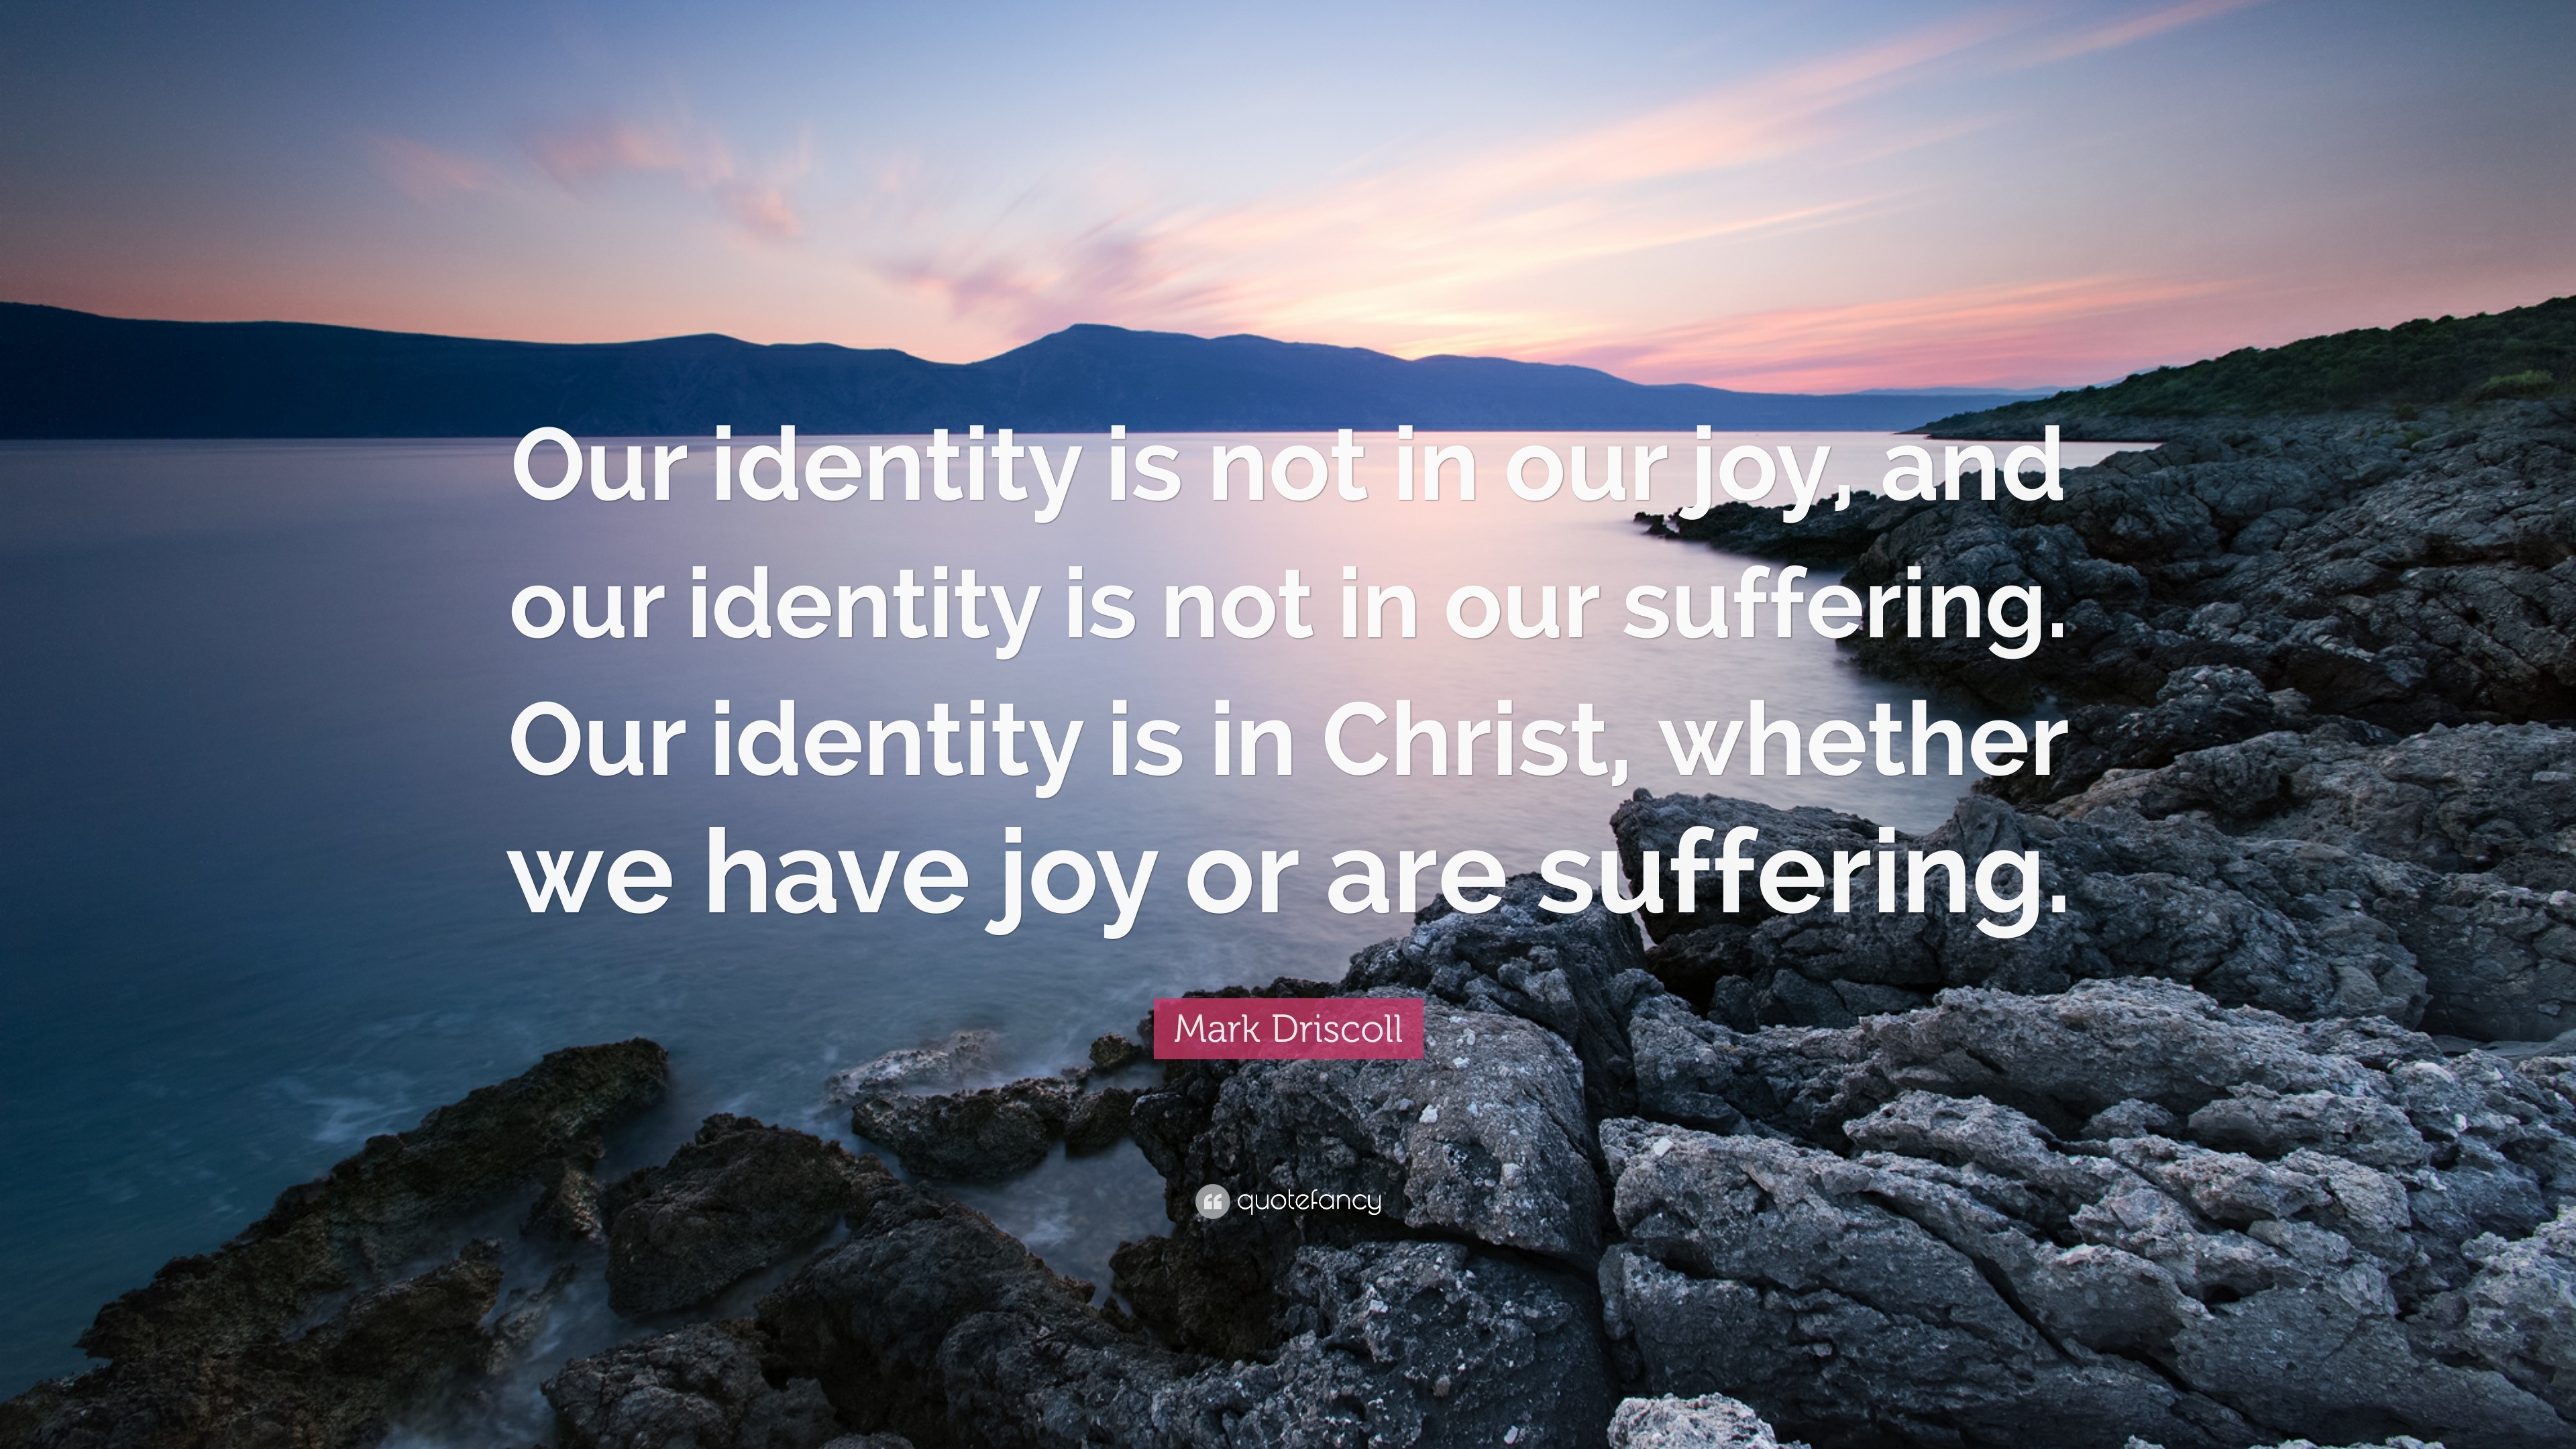 Mark Driscoll Quote: “Our identity is not in our joy, and our identity